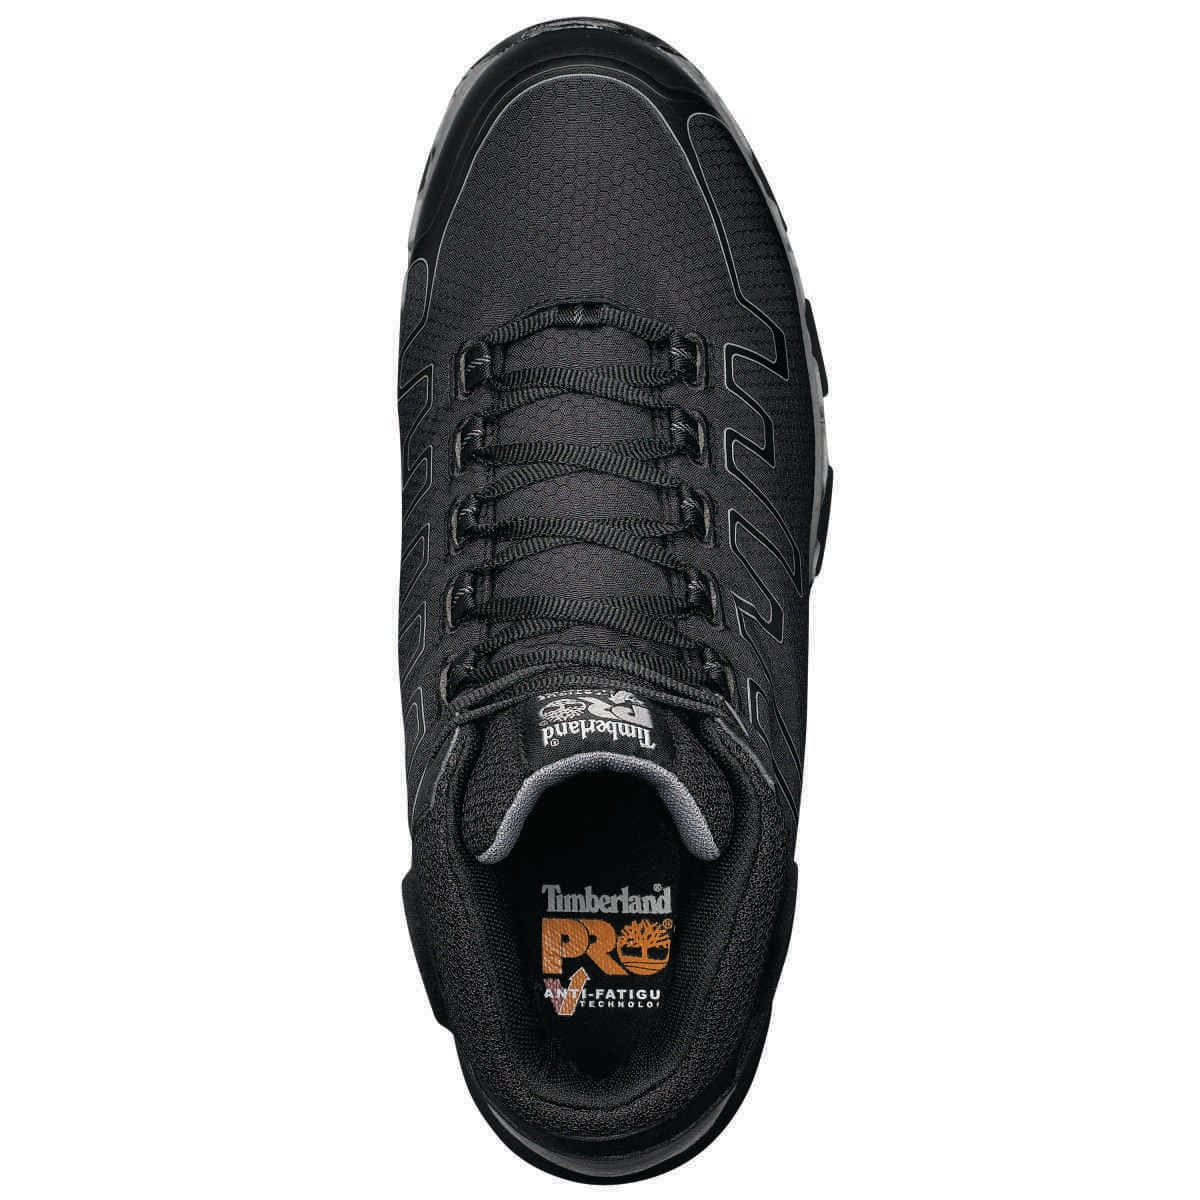 Timberland PRO Powertrain Mid-Height Work Shoes